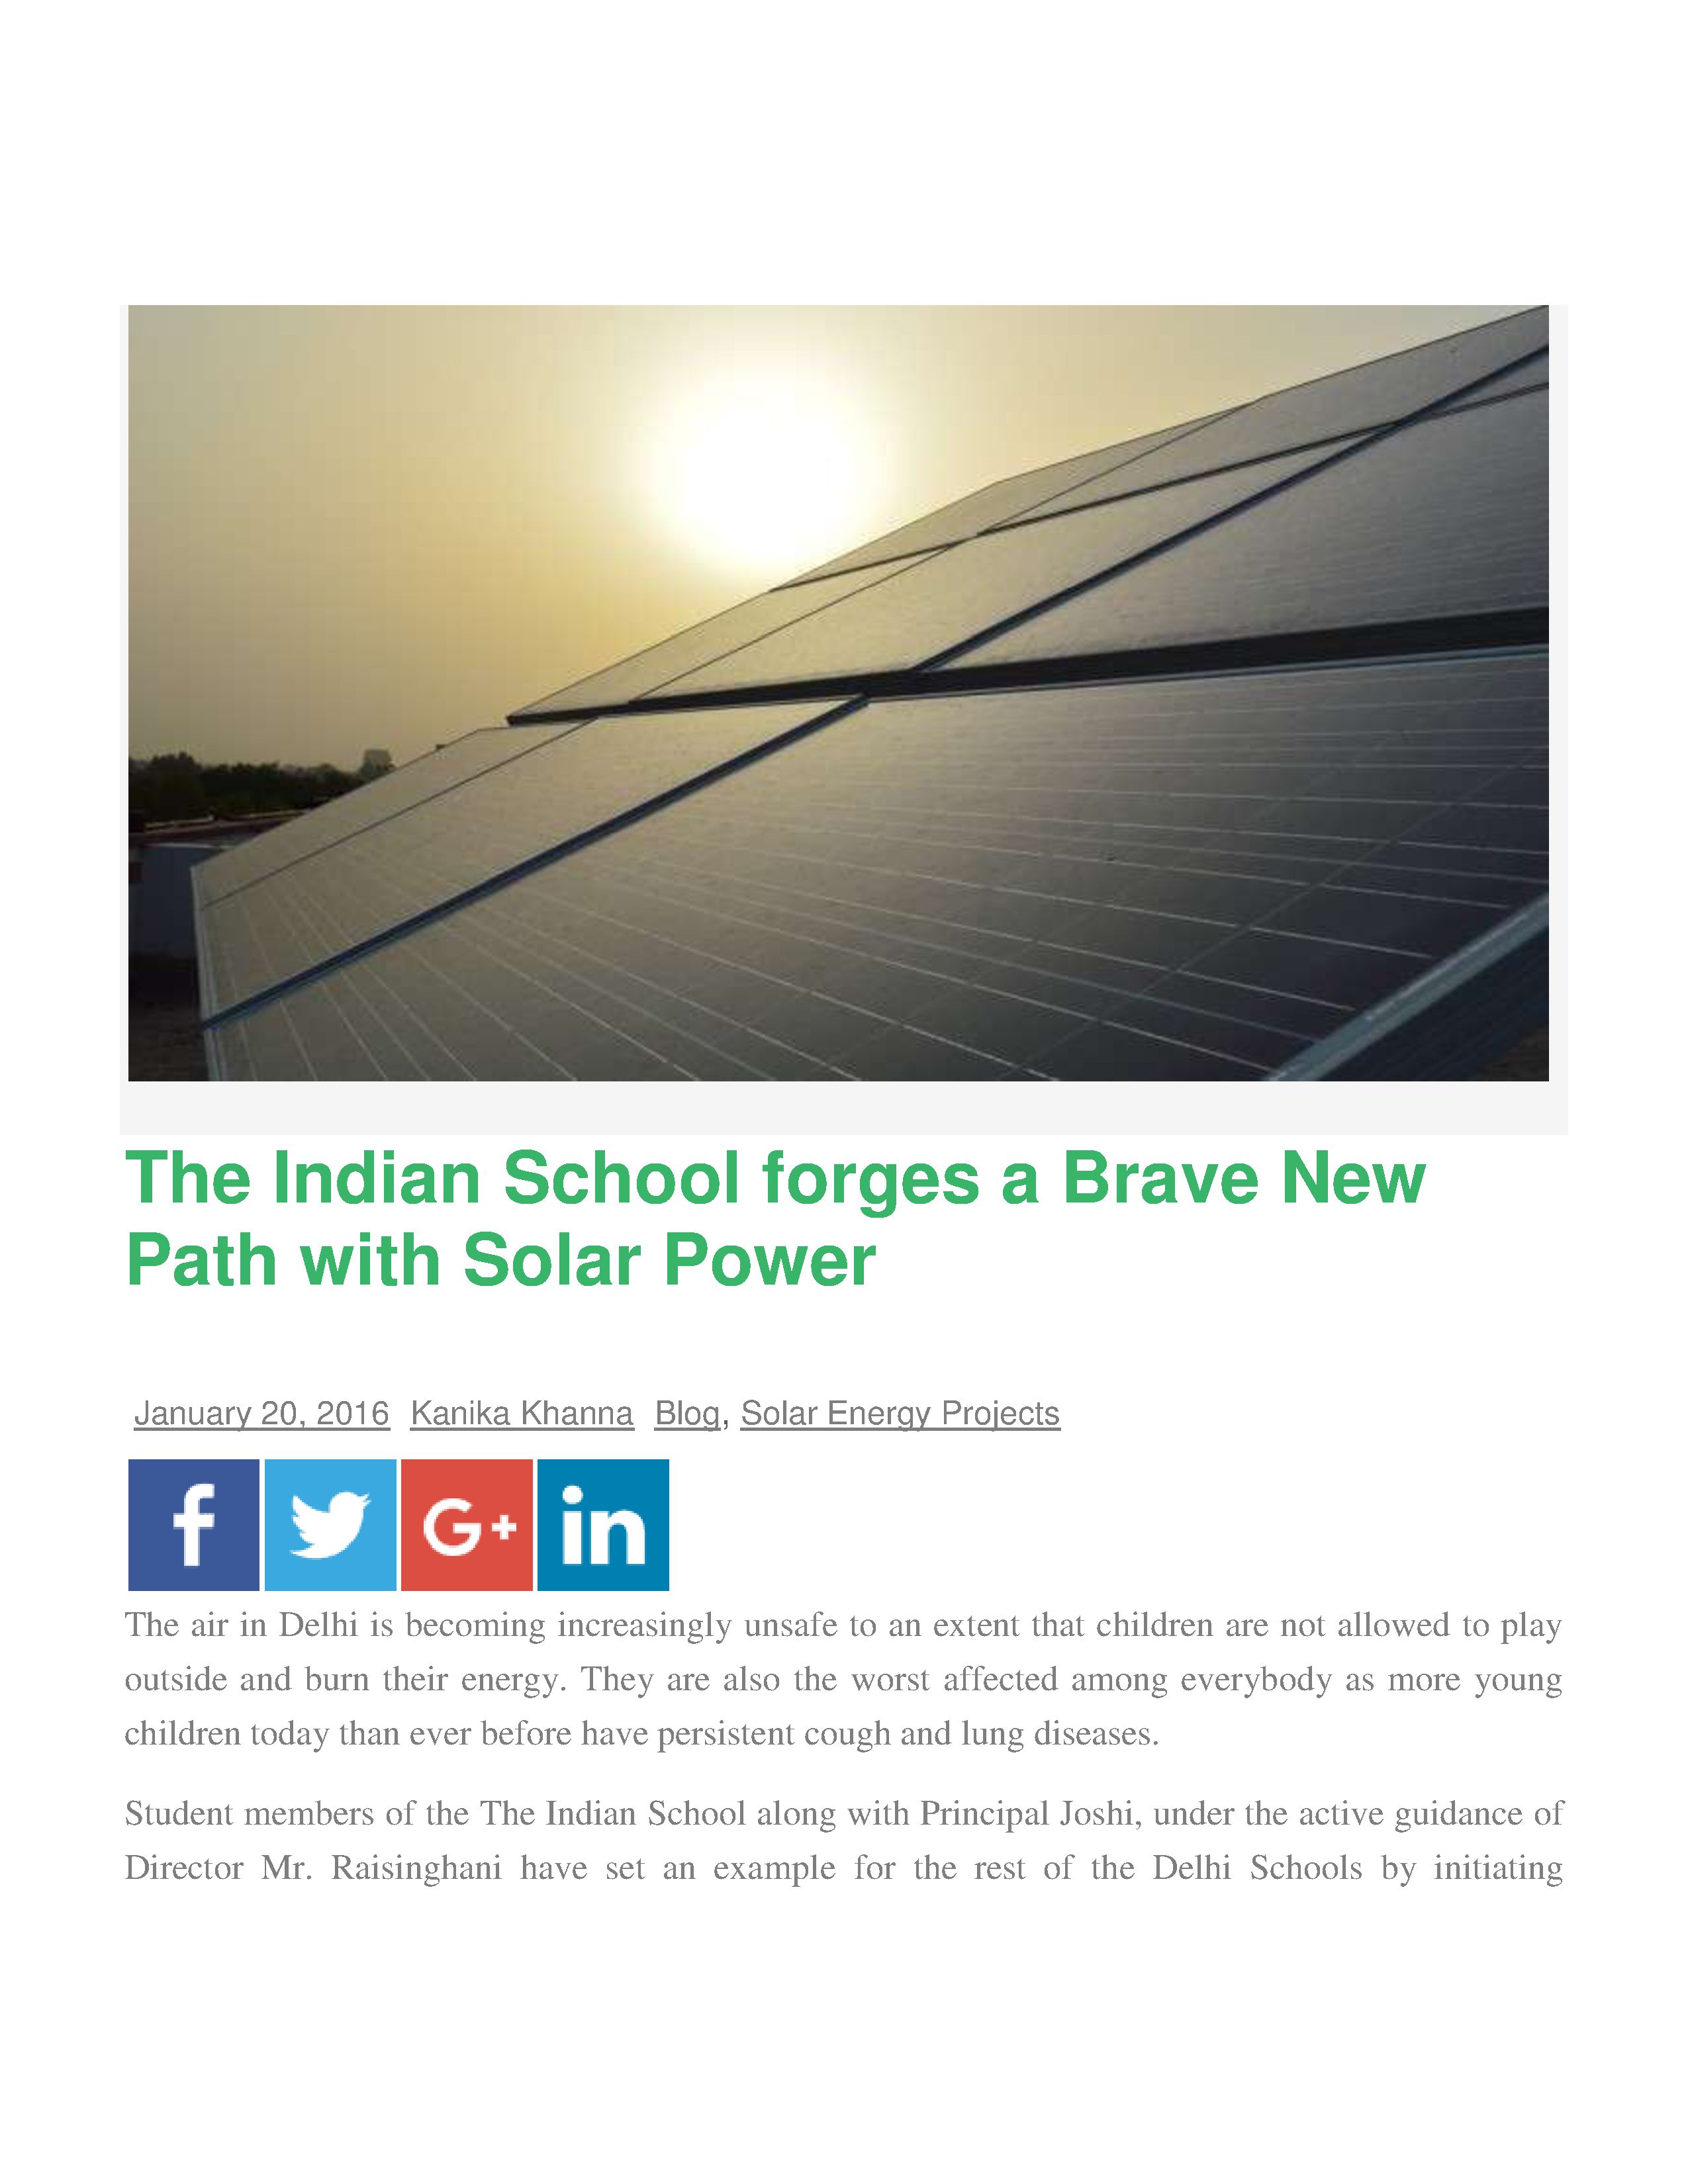 The Indian School forges a brave new Path with Solar Power